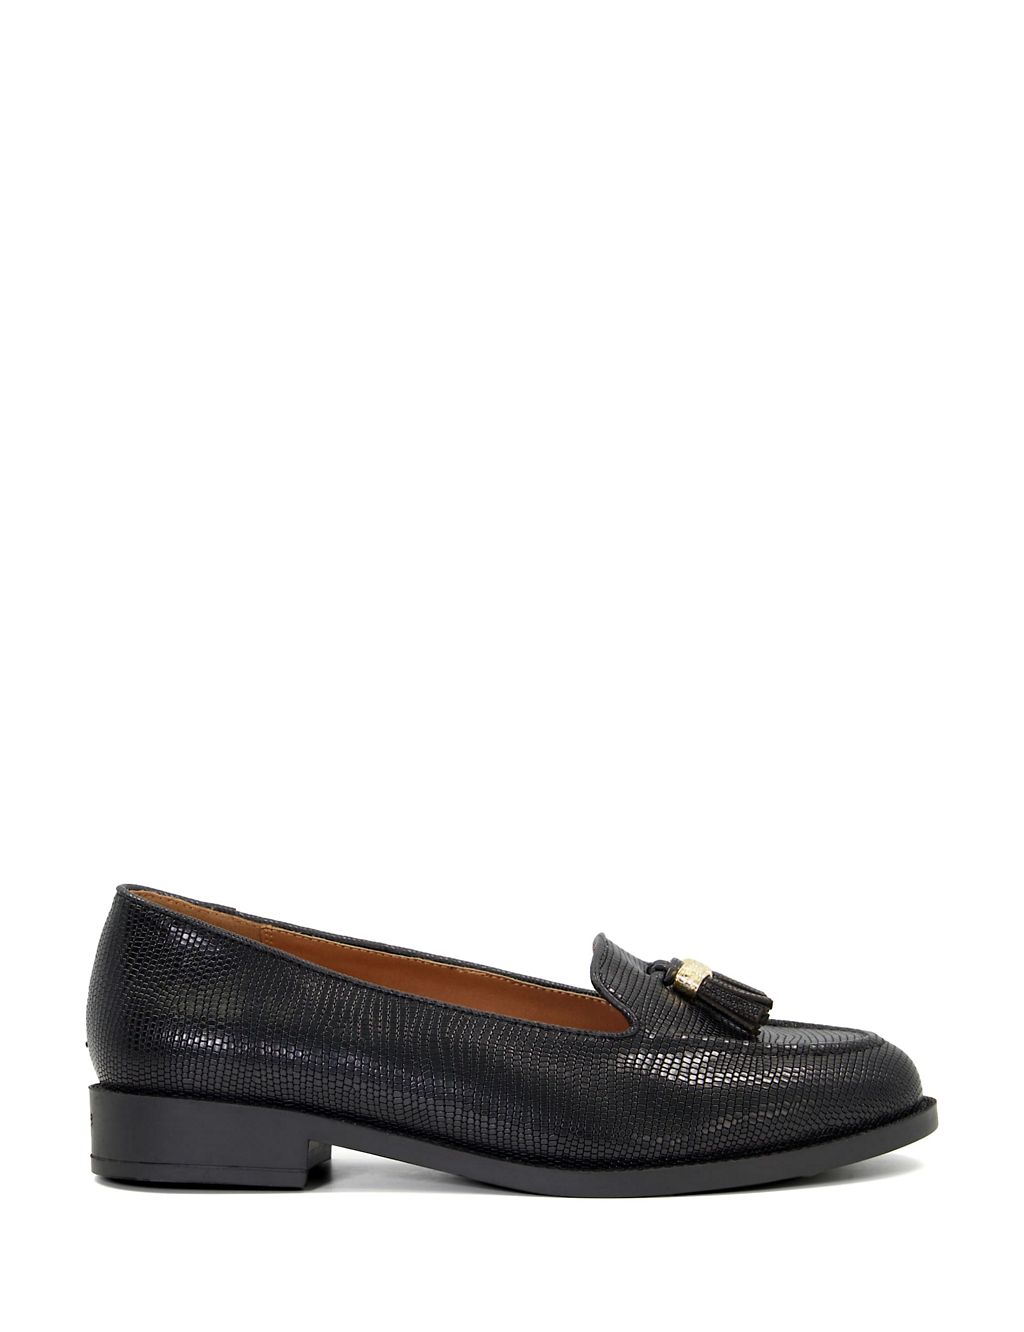 Leather Tassel Flat Loafers 1 of 7